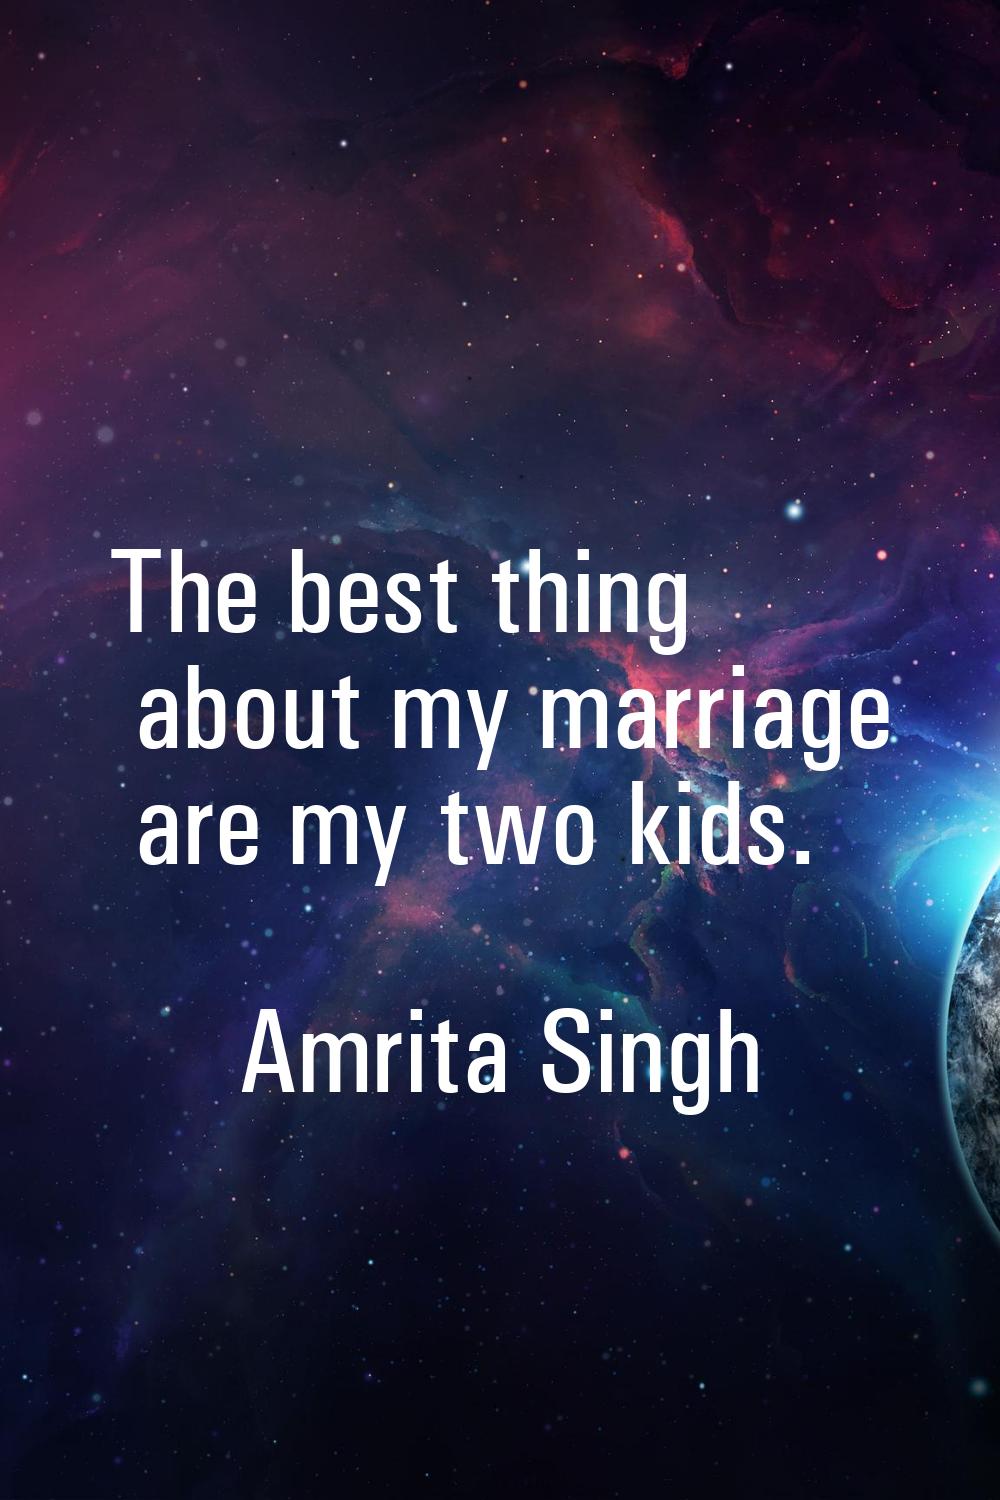 The best thing about my marriage are my two kids.